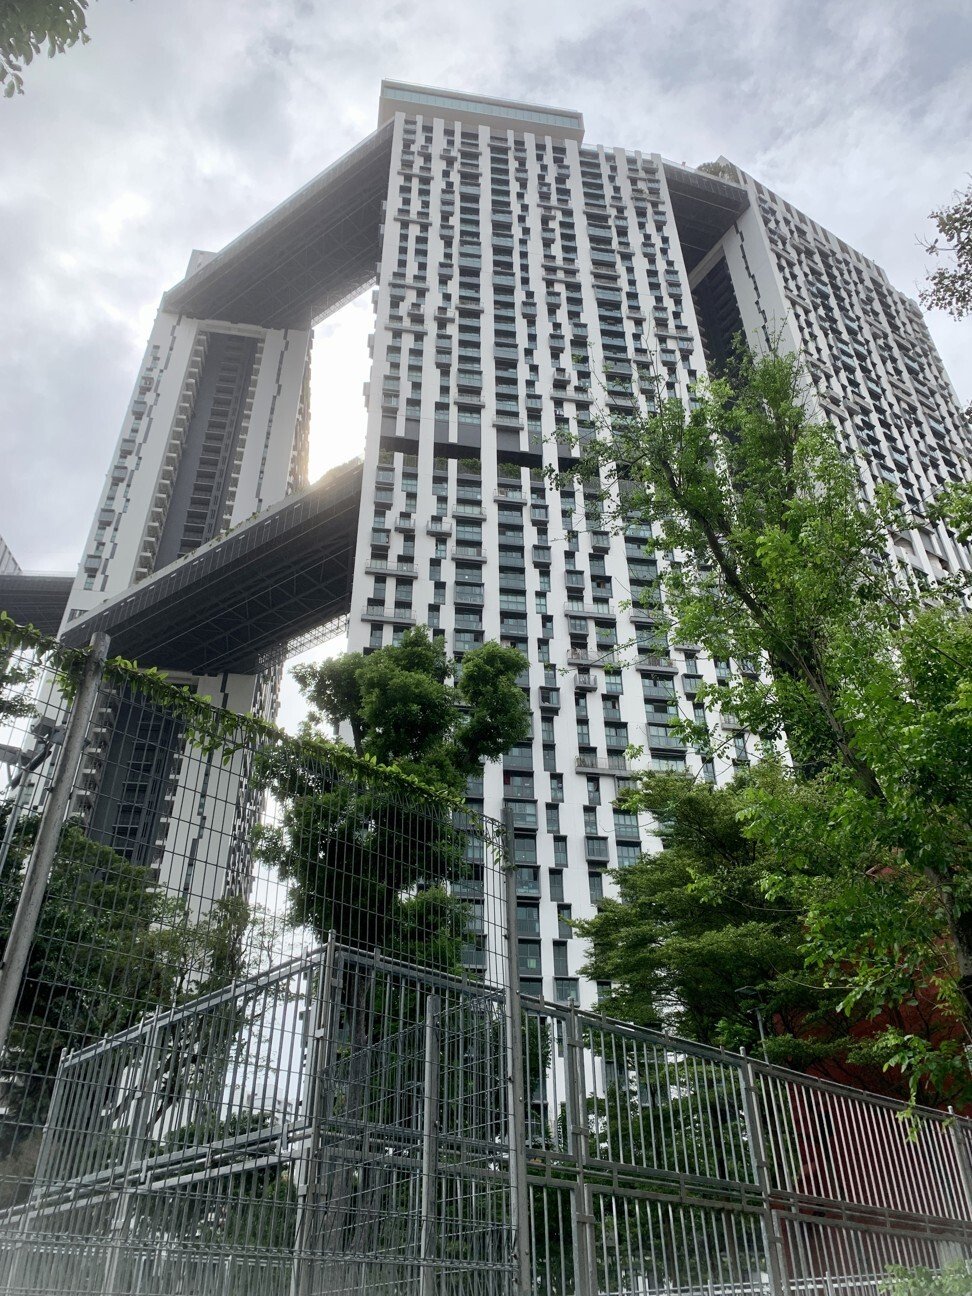 Sky-high prices: the million-dollar question facing Singapore’s public housing